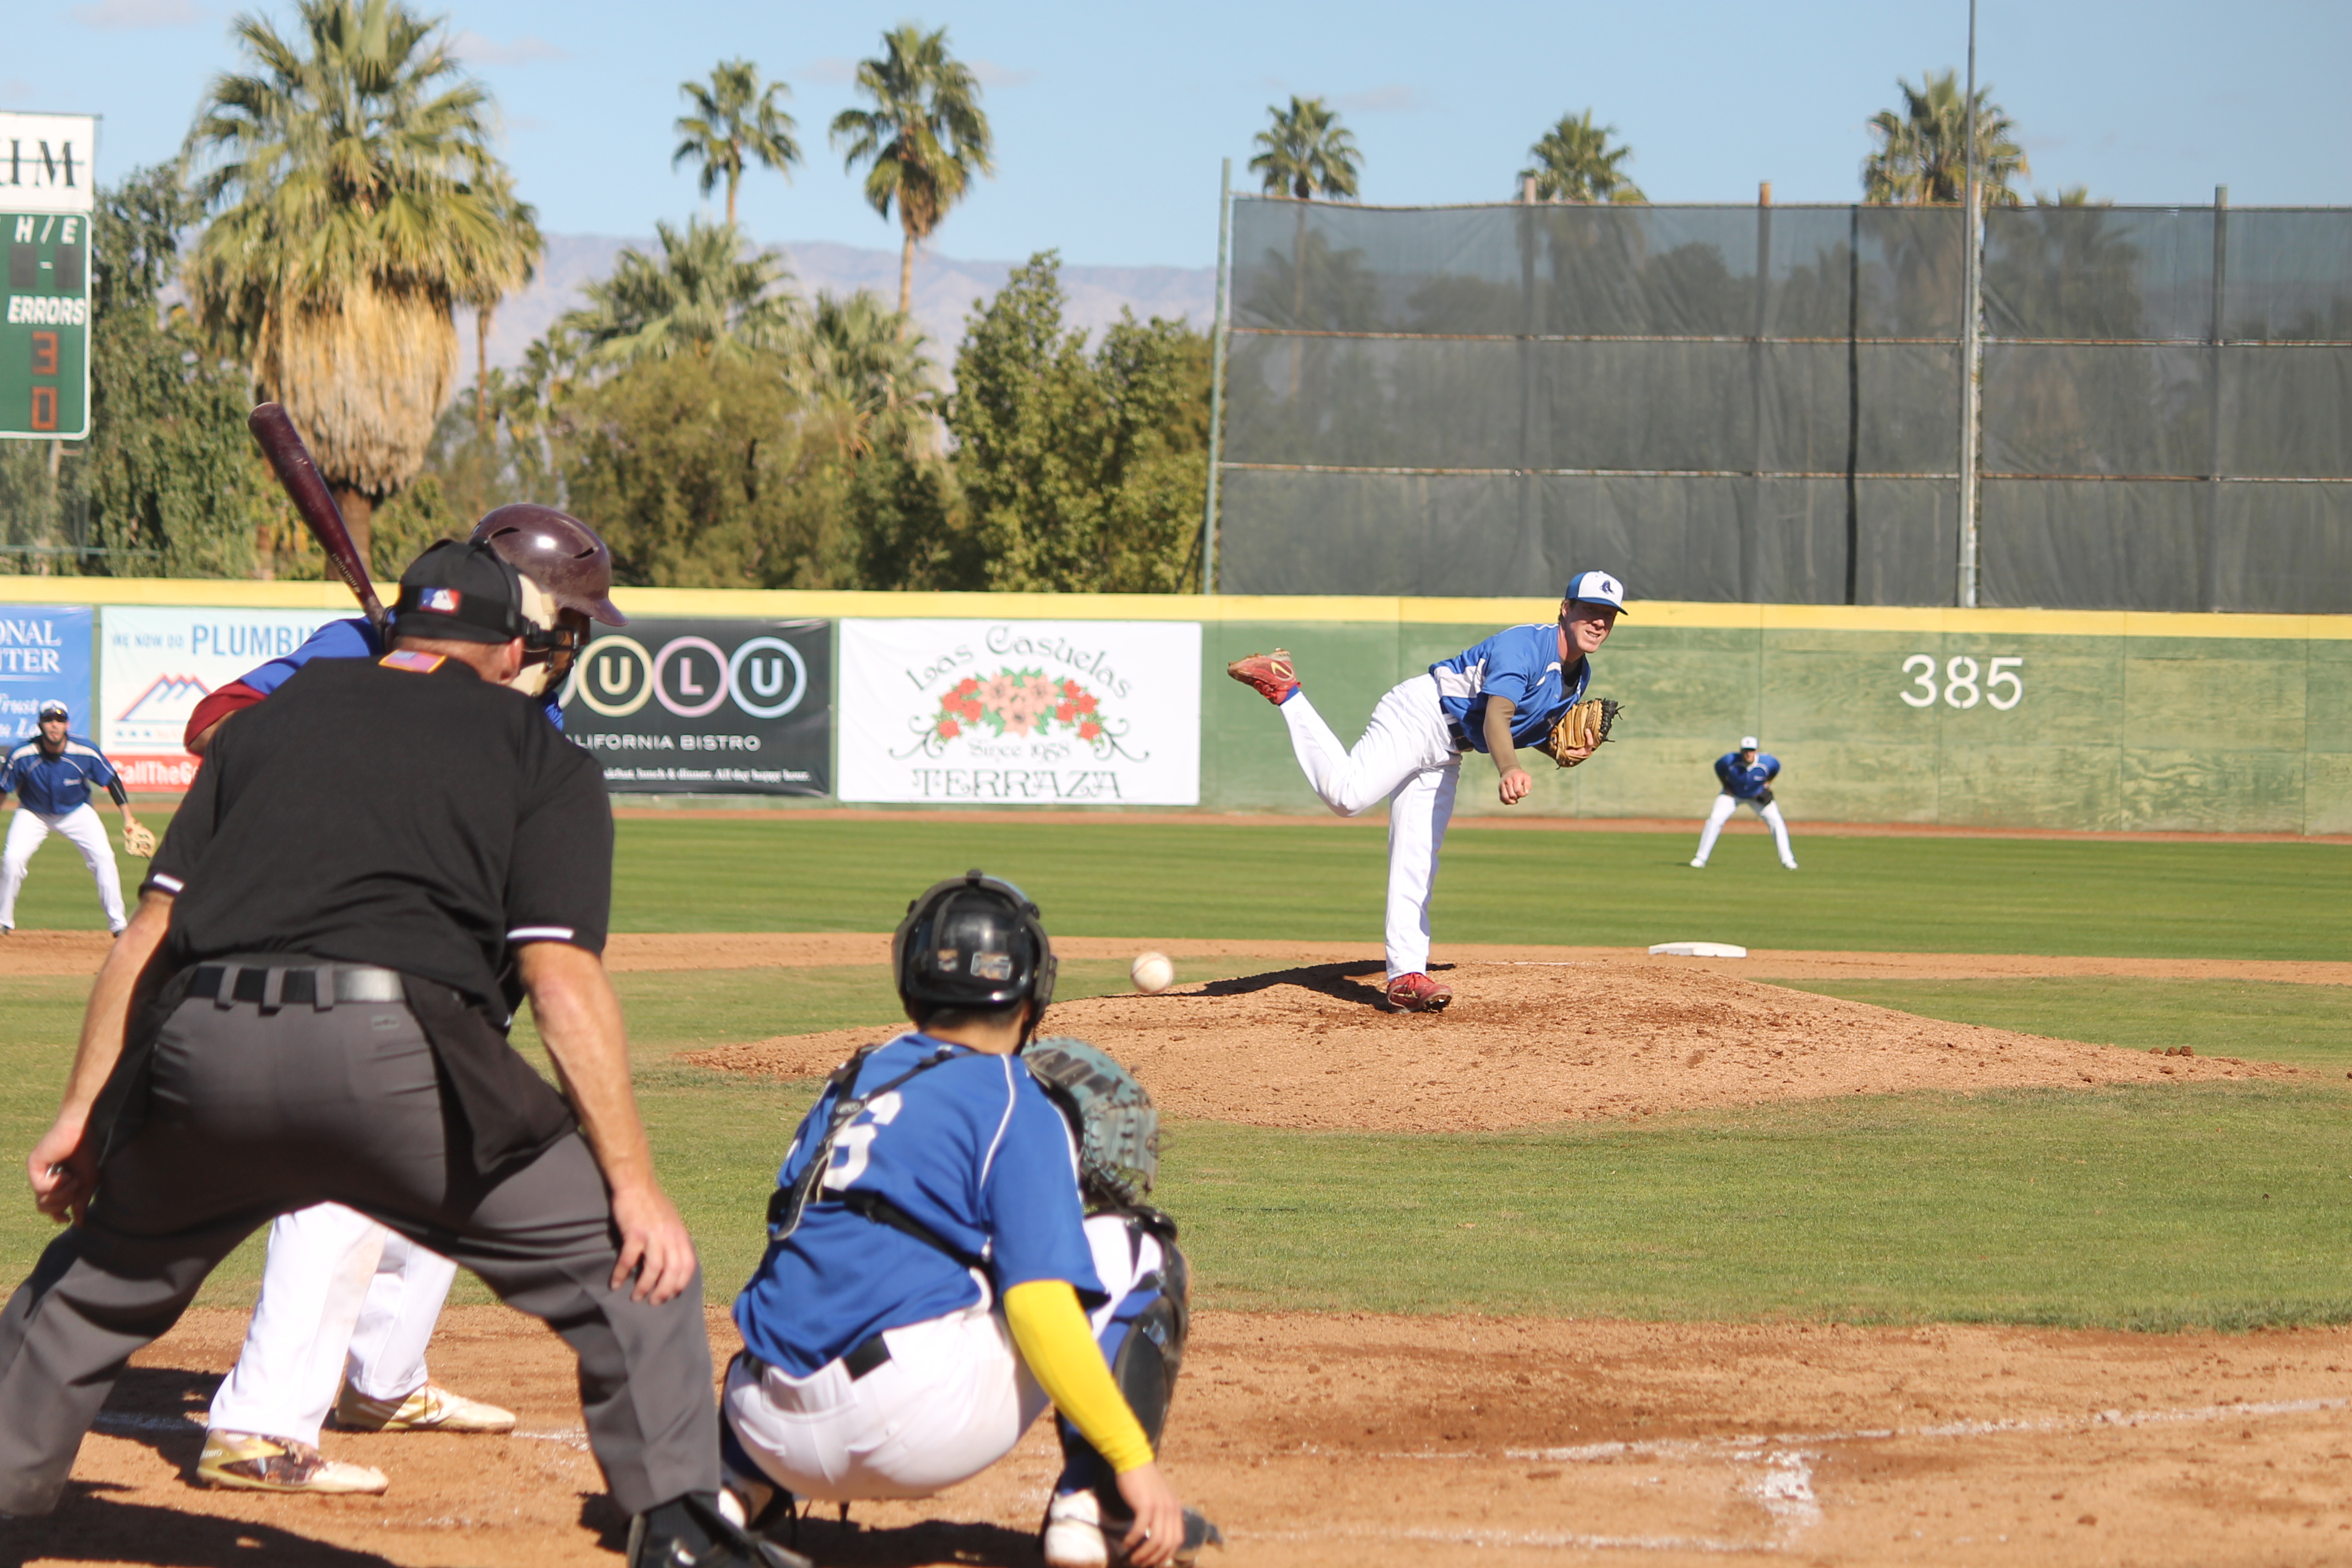 Wild Day Ends In Walk-Off For Compton, Blue Sox